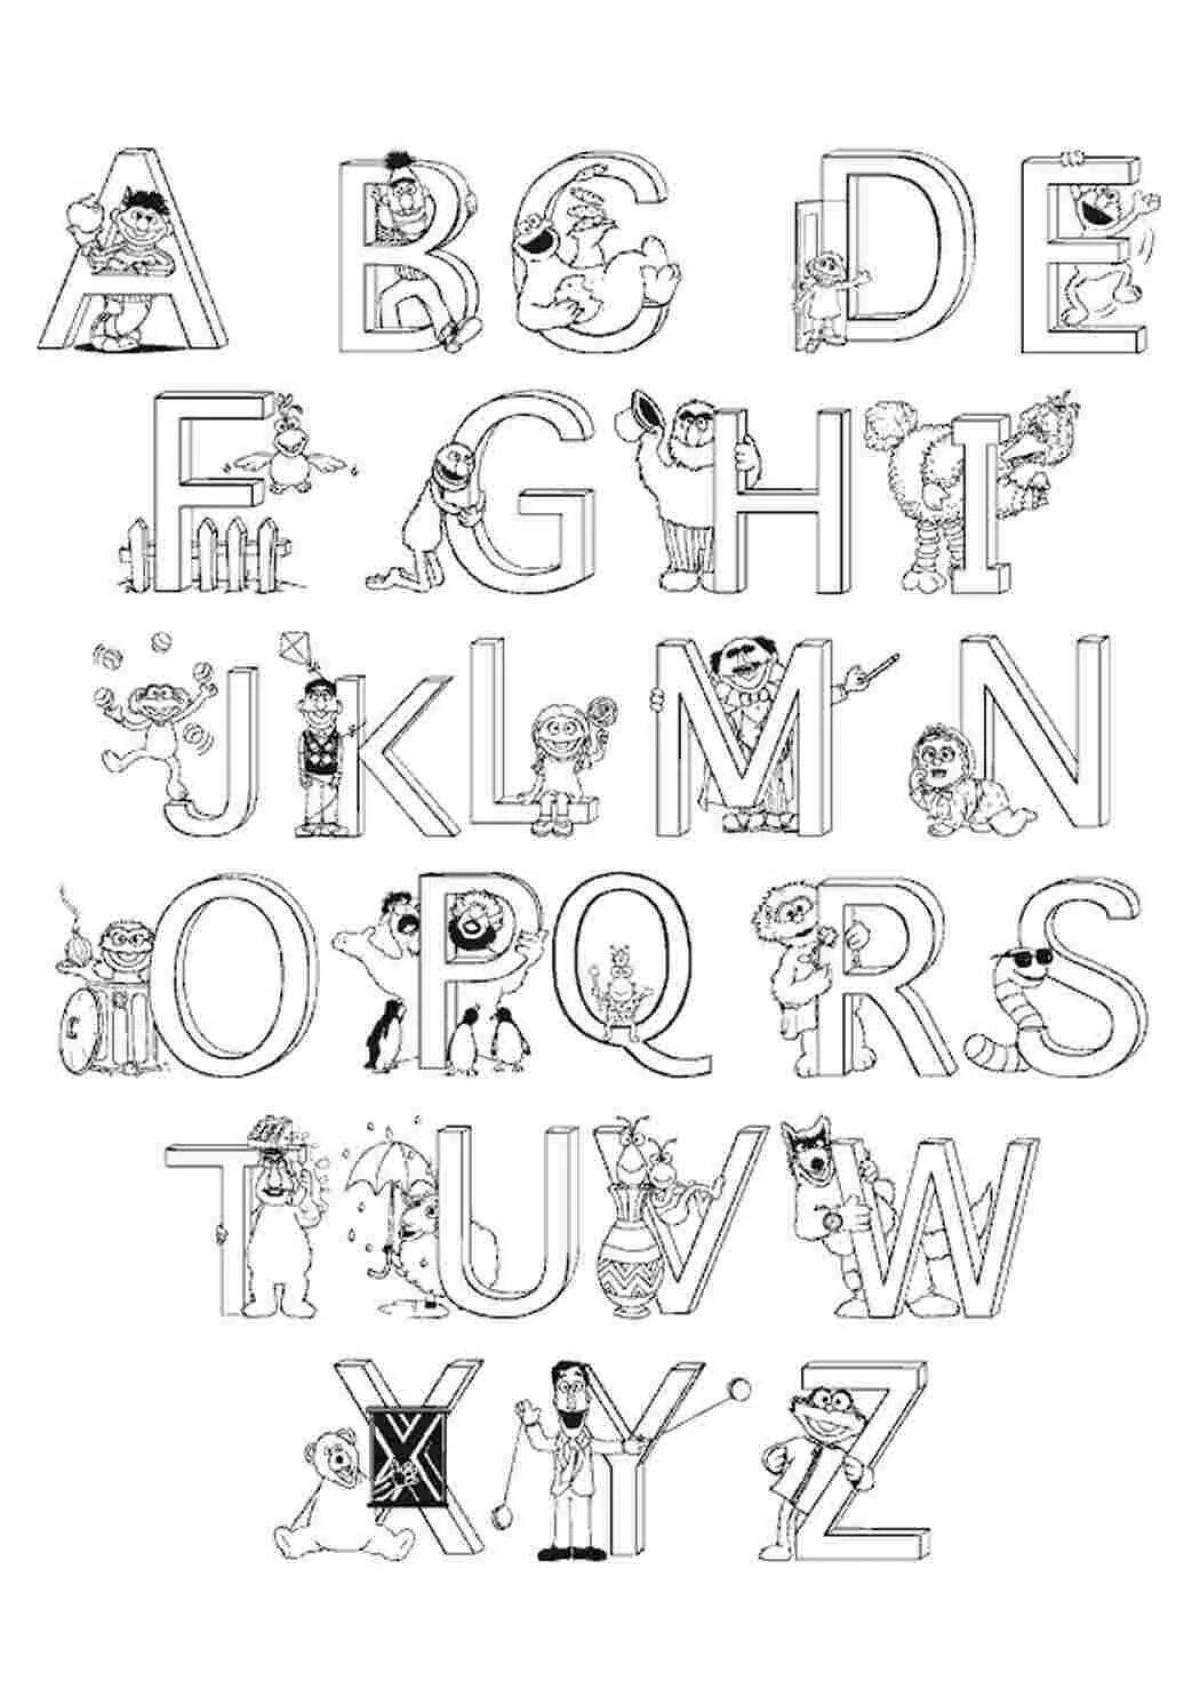 Colourful coloring of the English alphabet for kids